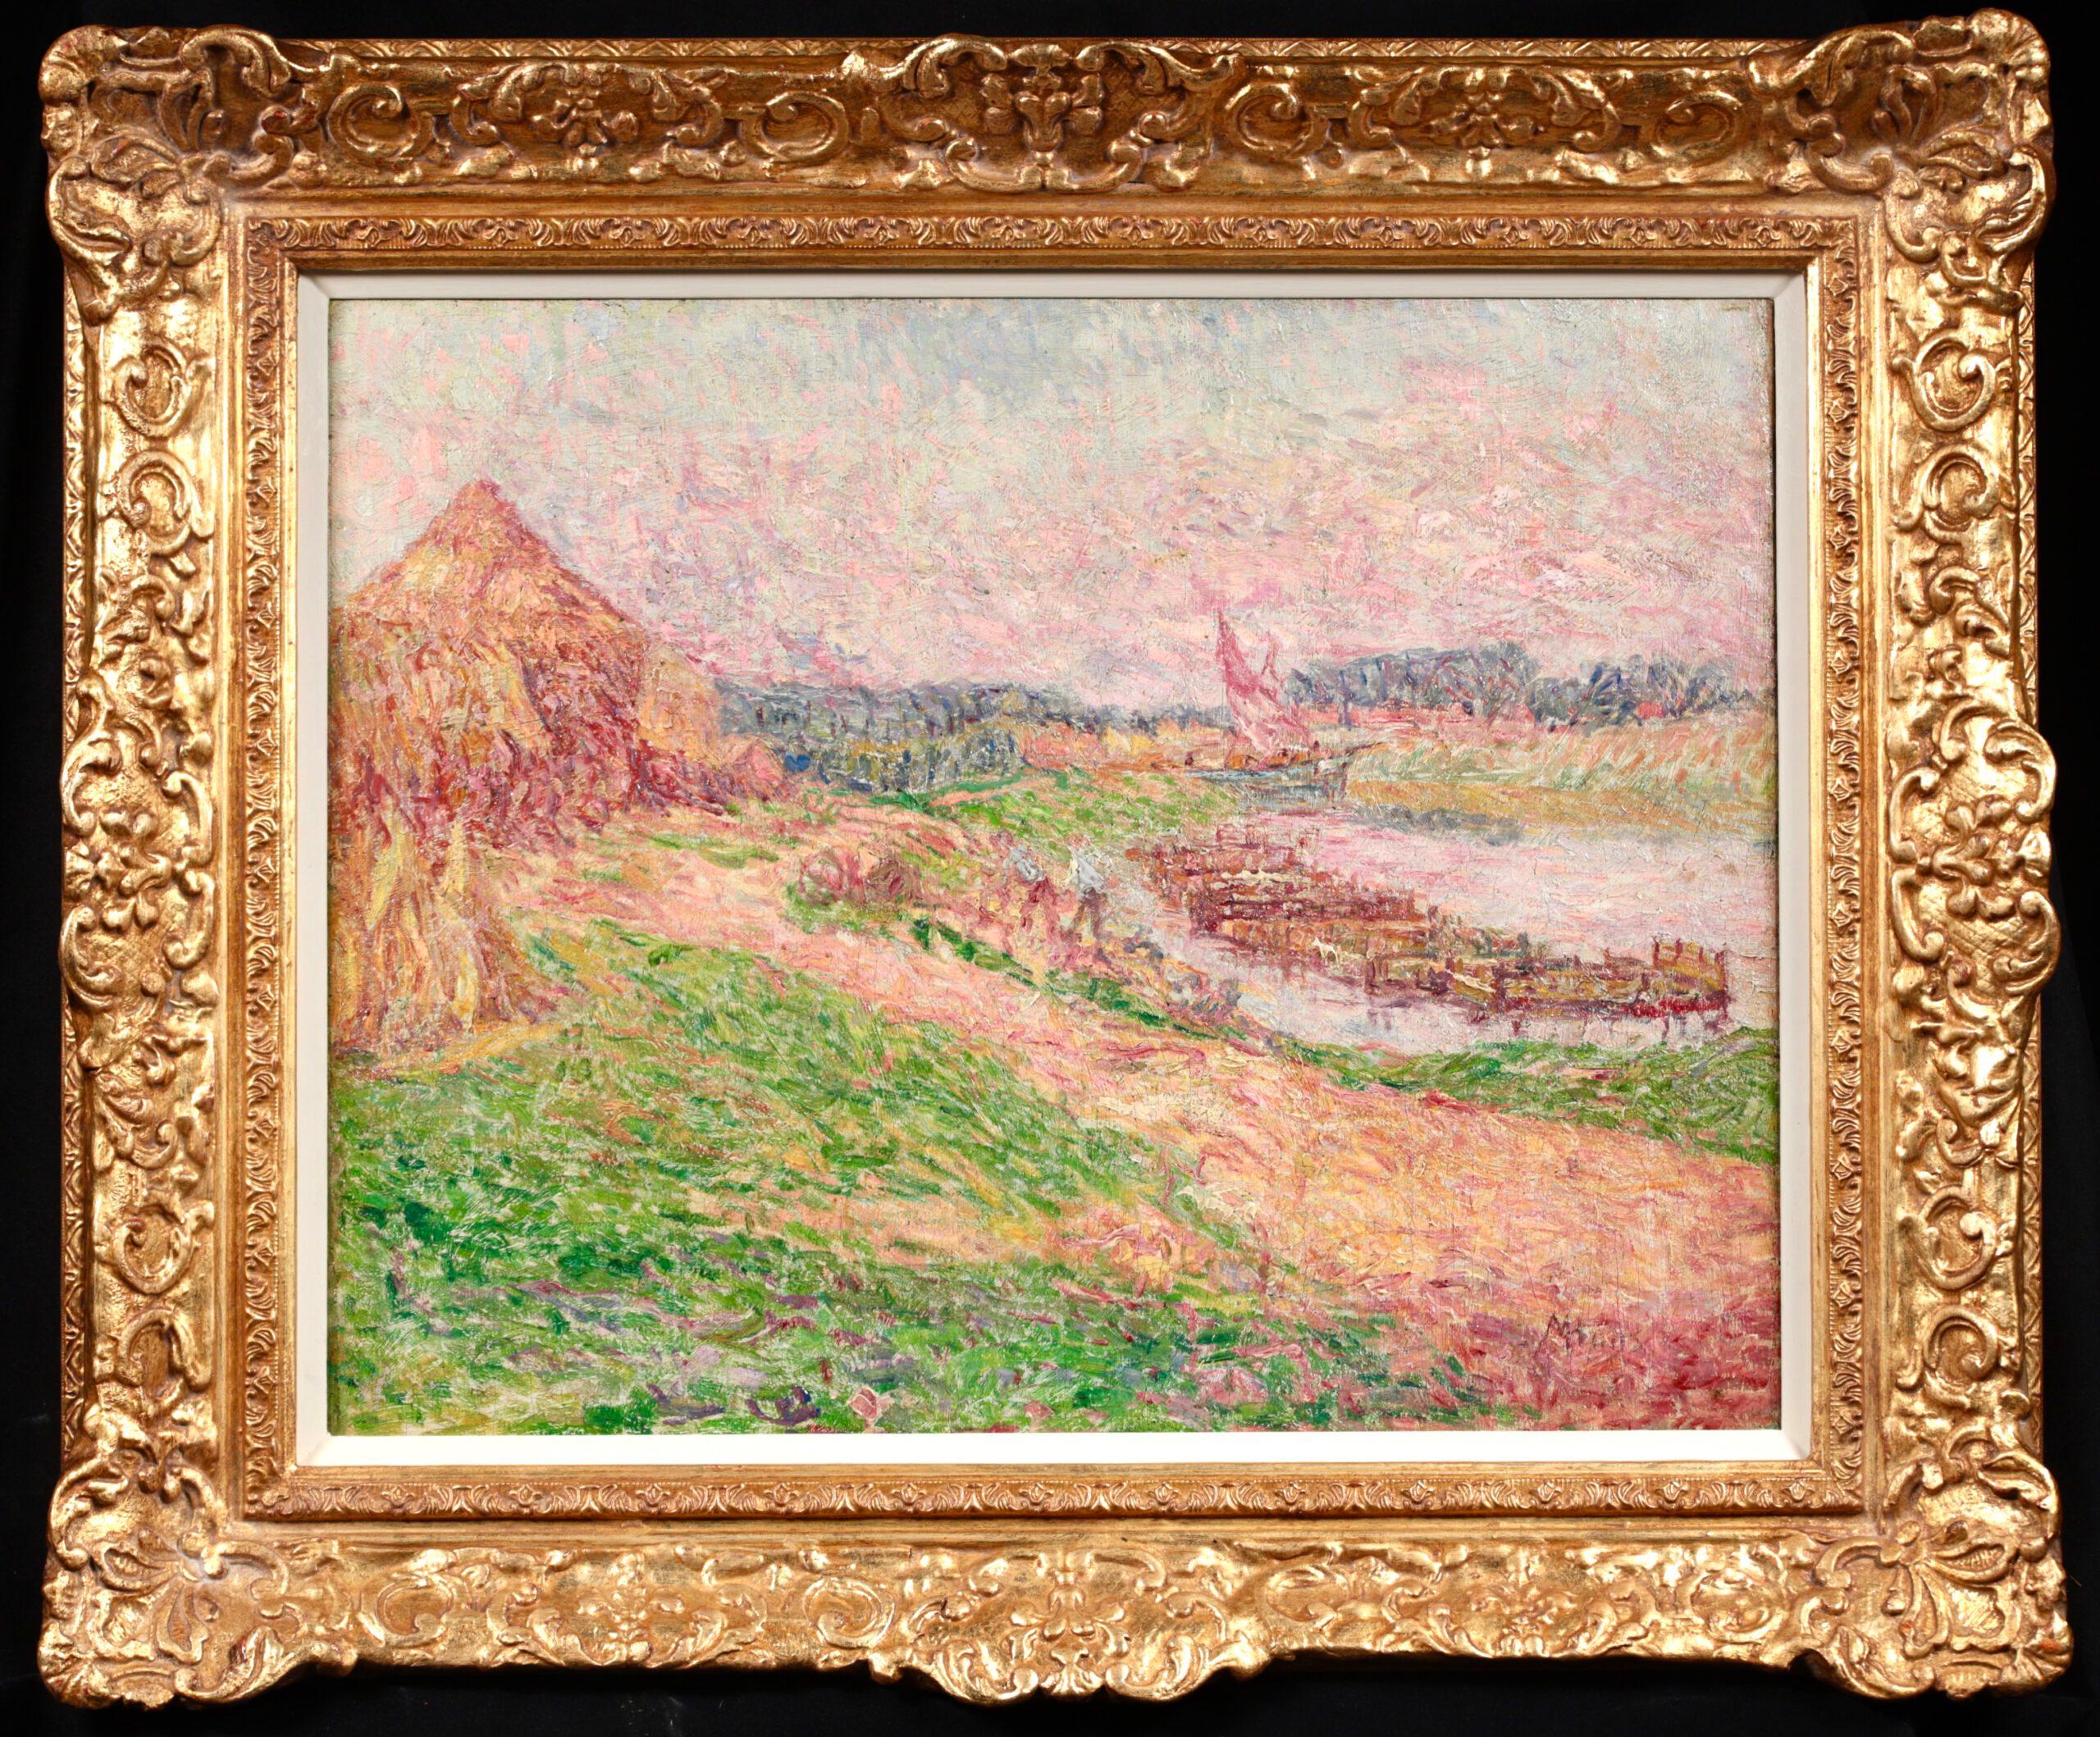 Signed divisionist landscape oil on canvas by Belgian post impressionist painter Modest Huys. This stunning piece depicts workers on the bank of a river loading flax onto barges.

Signature:
Signed lower right

Dimensions:
Framed: 23"x27" 
Unframed: